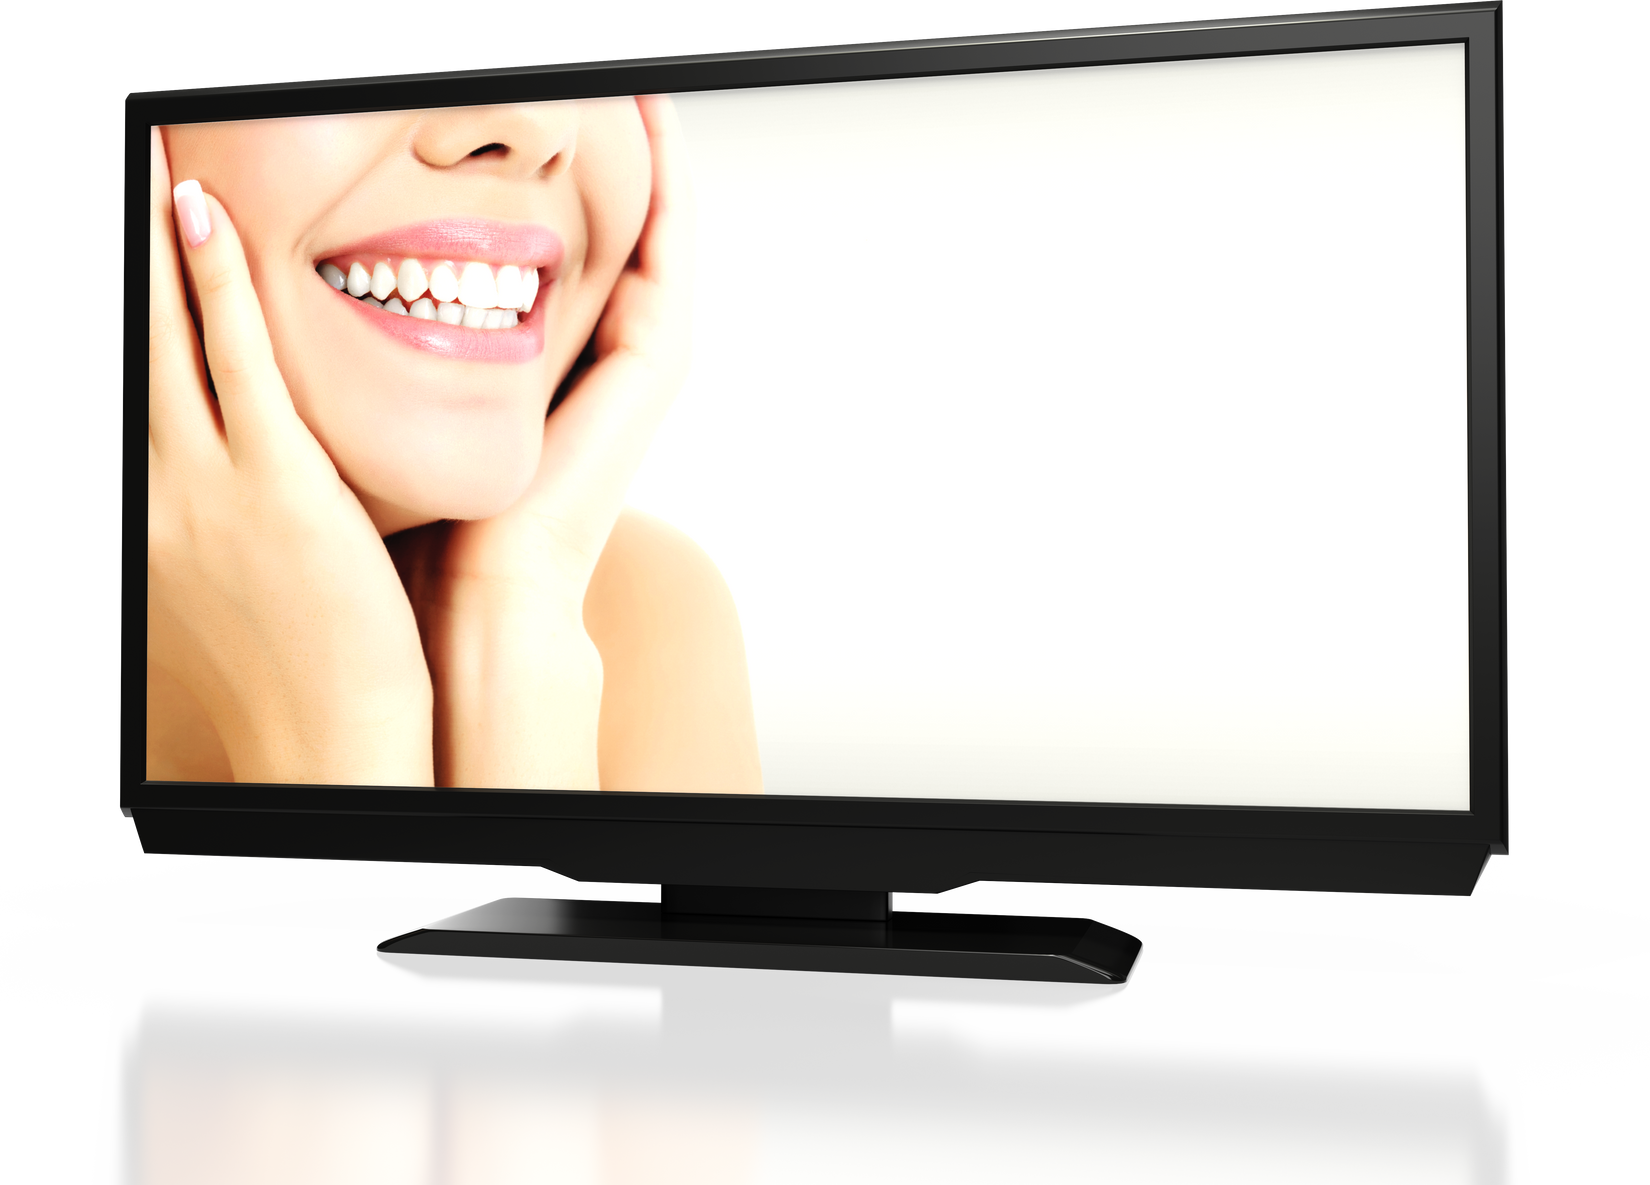 Cheerful Female Smile on an Abstract LED Tv Screen, White Backgr